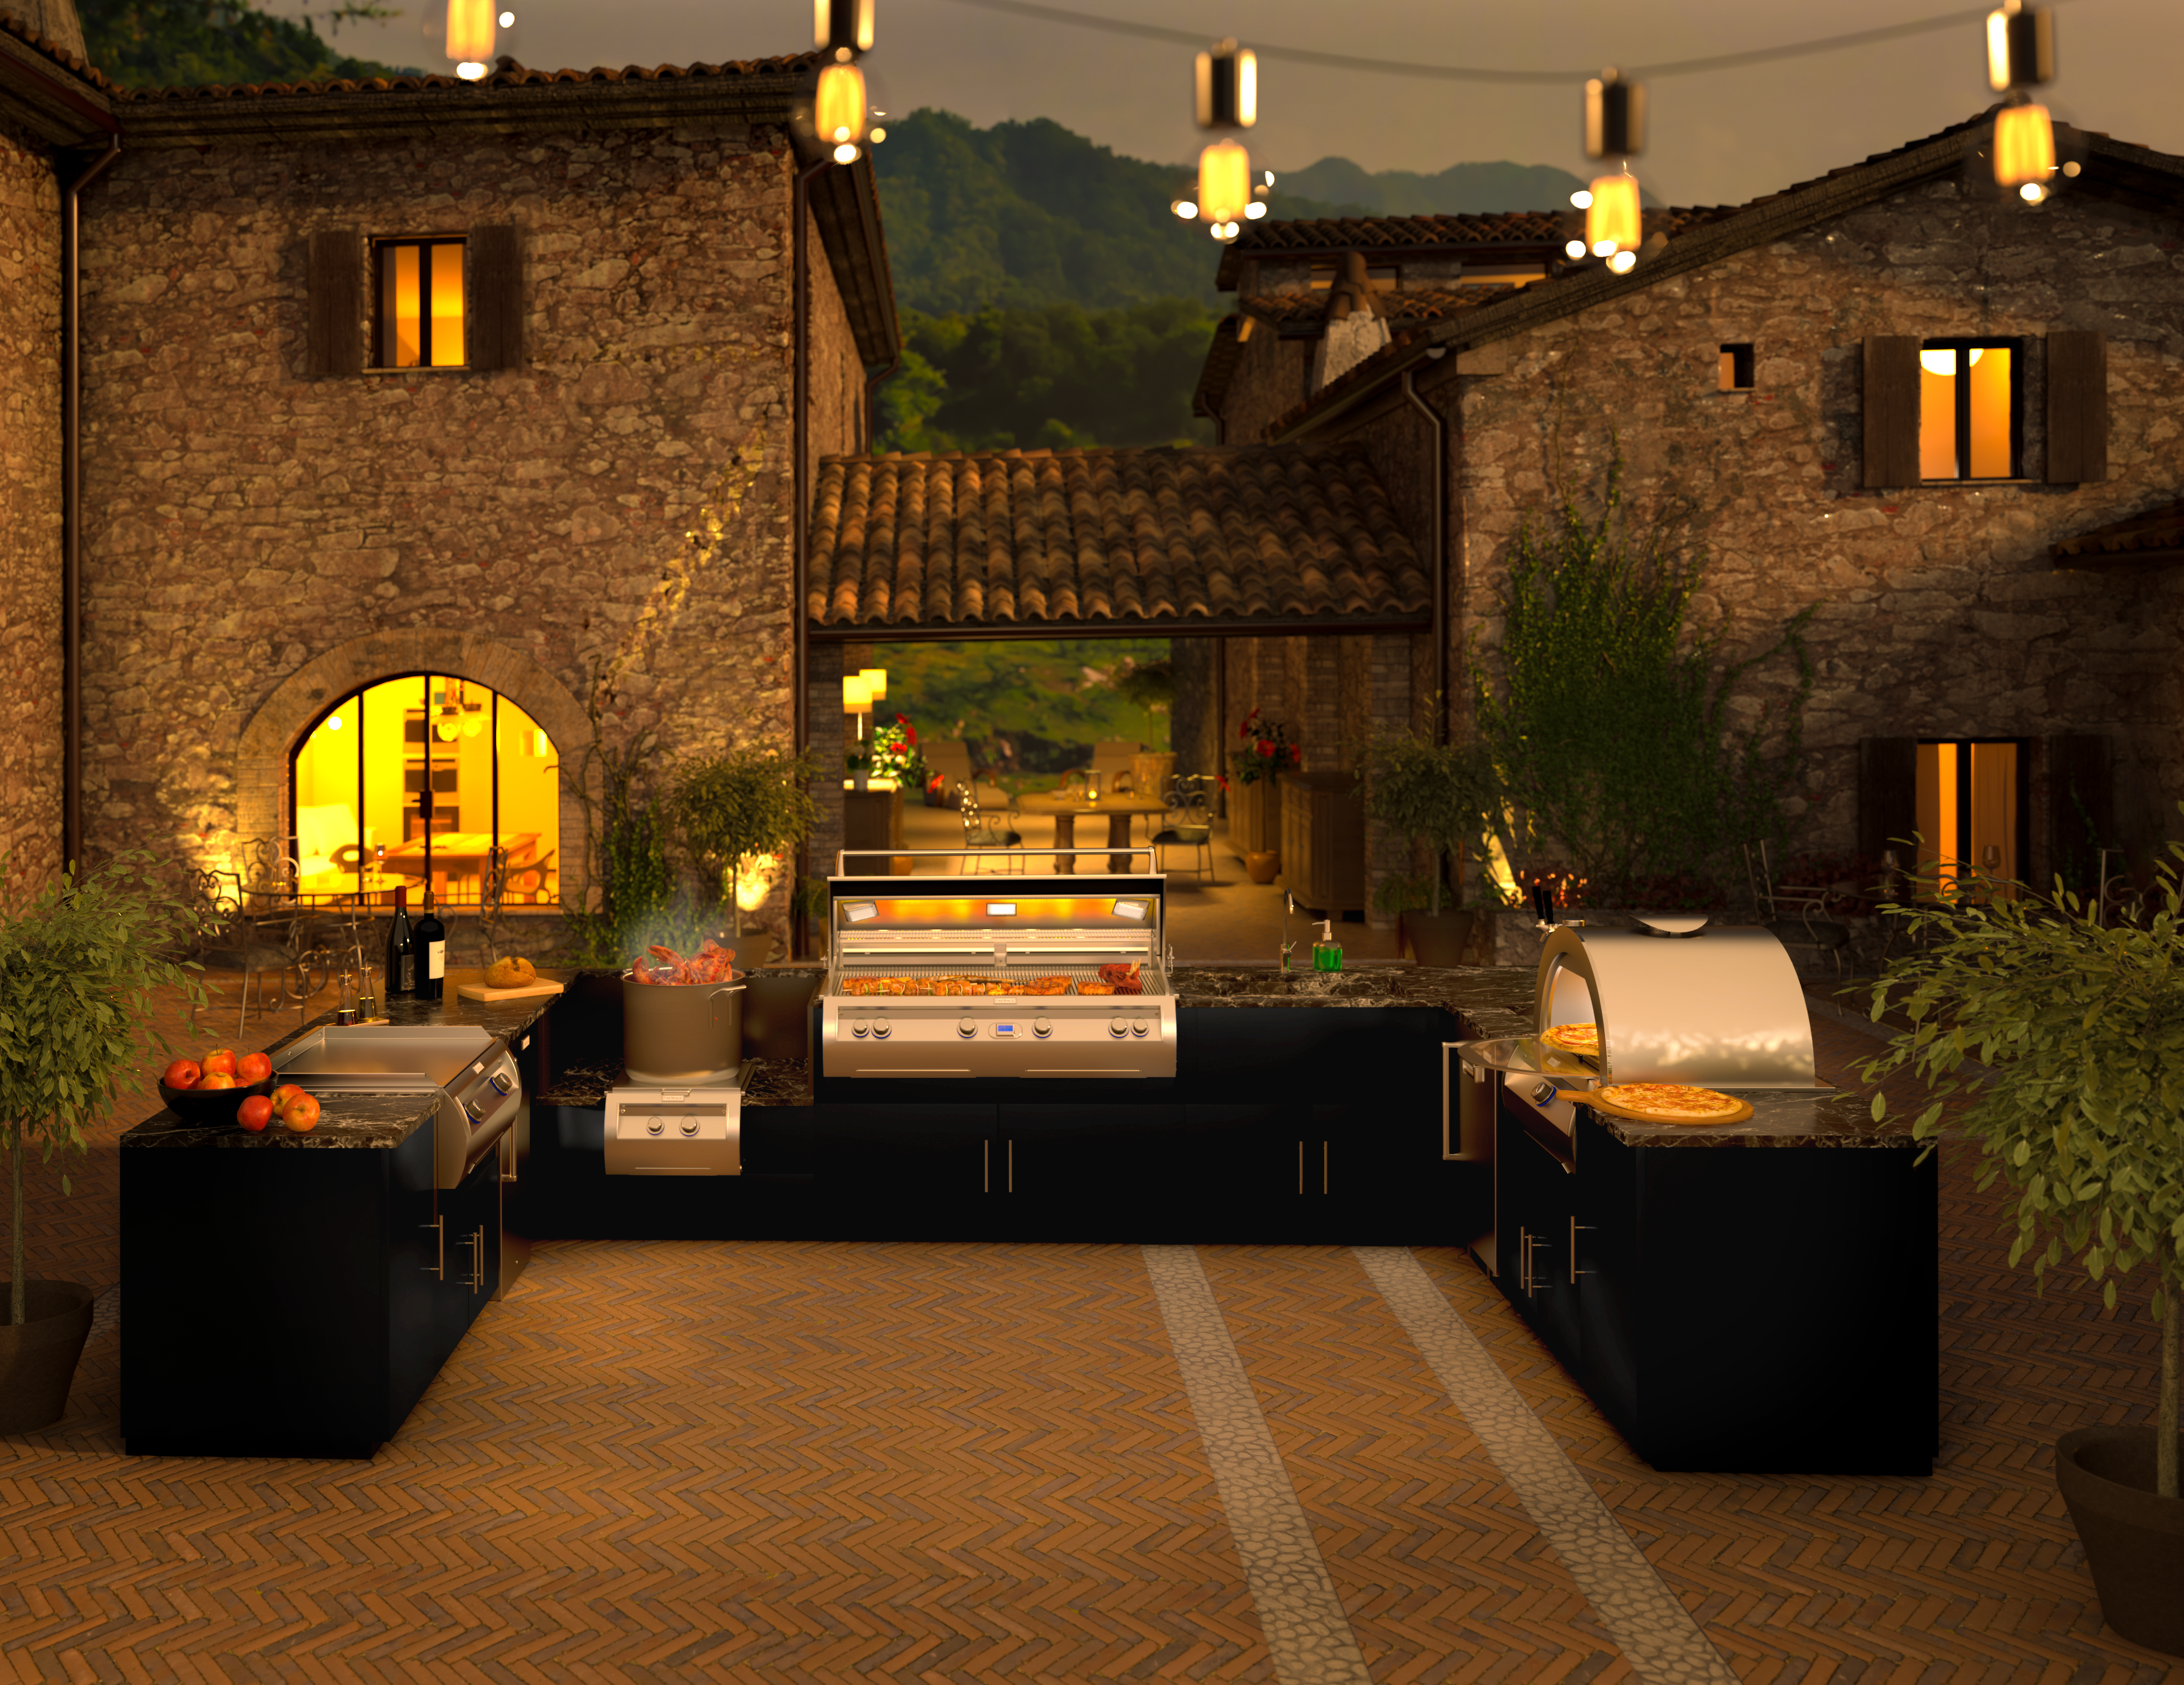 Get Inspired for Your Dream Outdoor Kitchen!